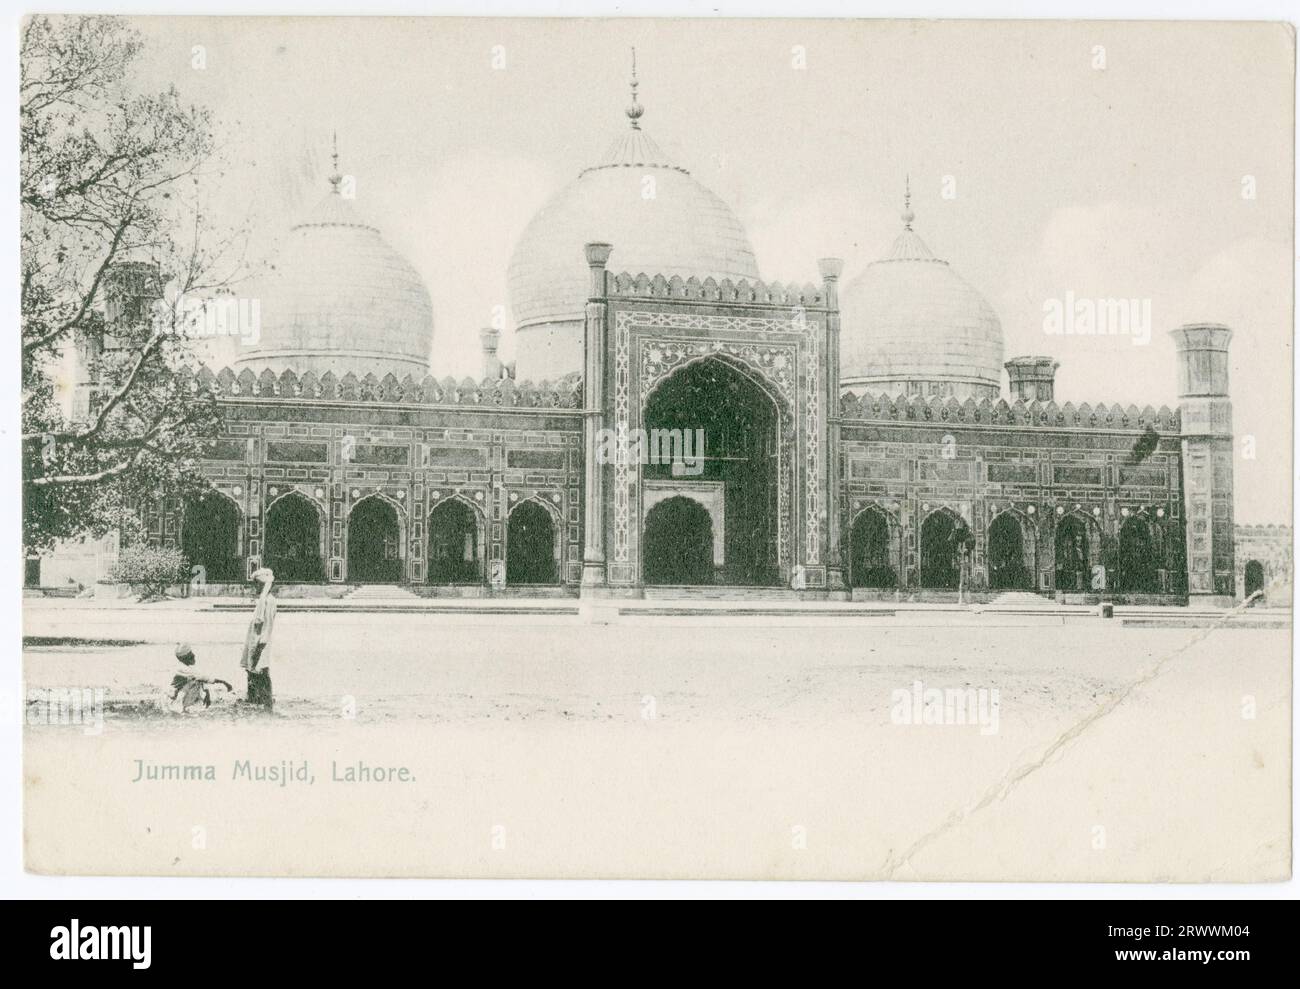 View of large mosque, with three domes, and a front elevation of traditional Islamic design. Identified by printed caption as Jumma Musjid, Lahore. Stock Photo